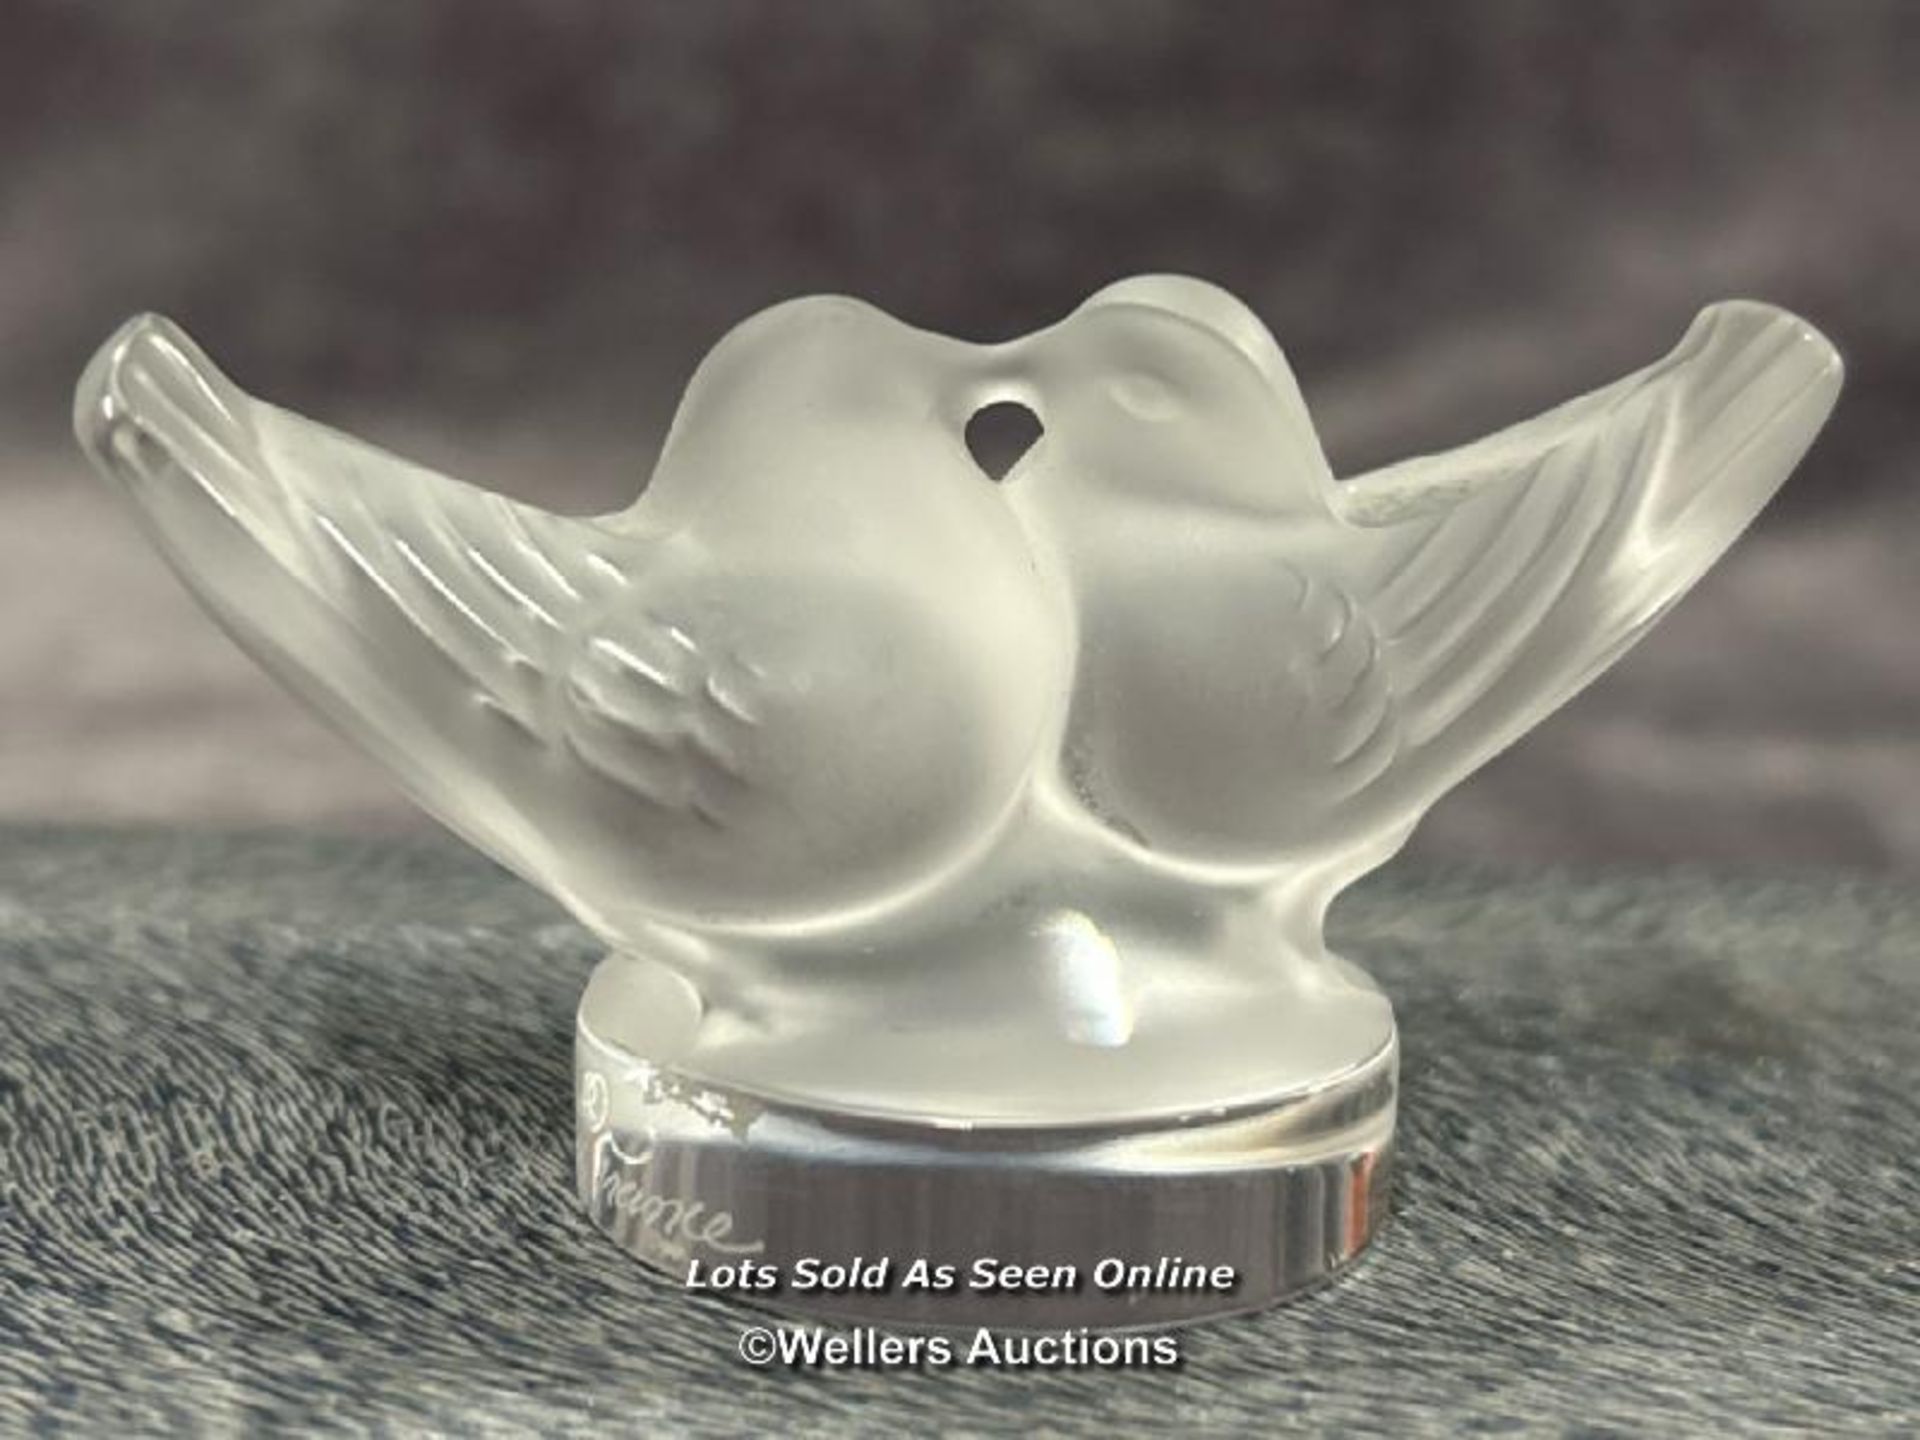 Lalique frosted crystal Kissing Doves paperweight, 4cm high, signed 'Lalique France' / AN2 - Image 2 of 3